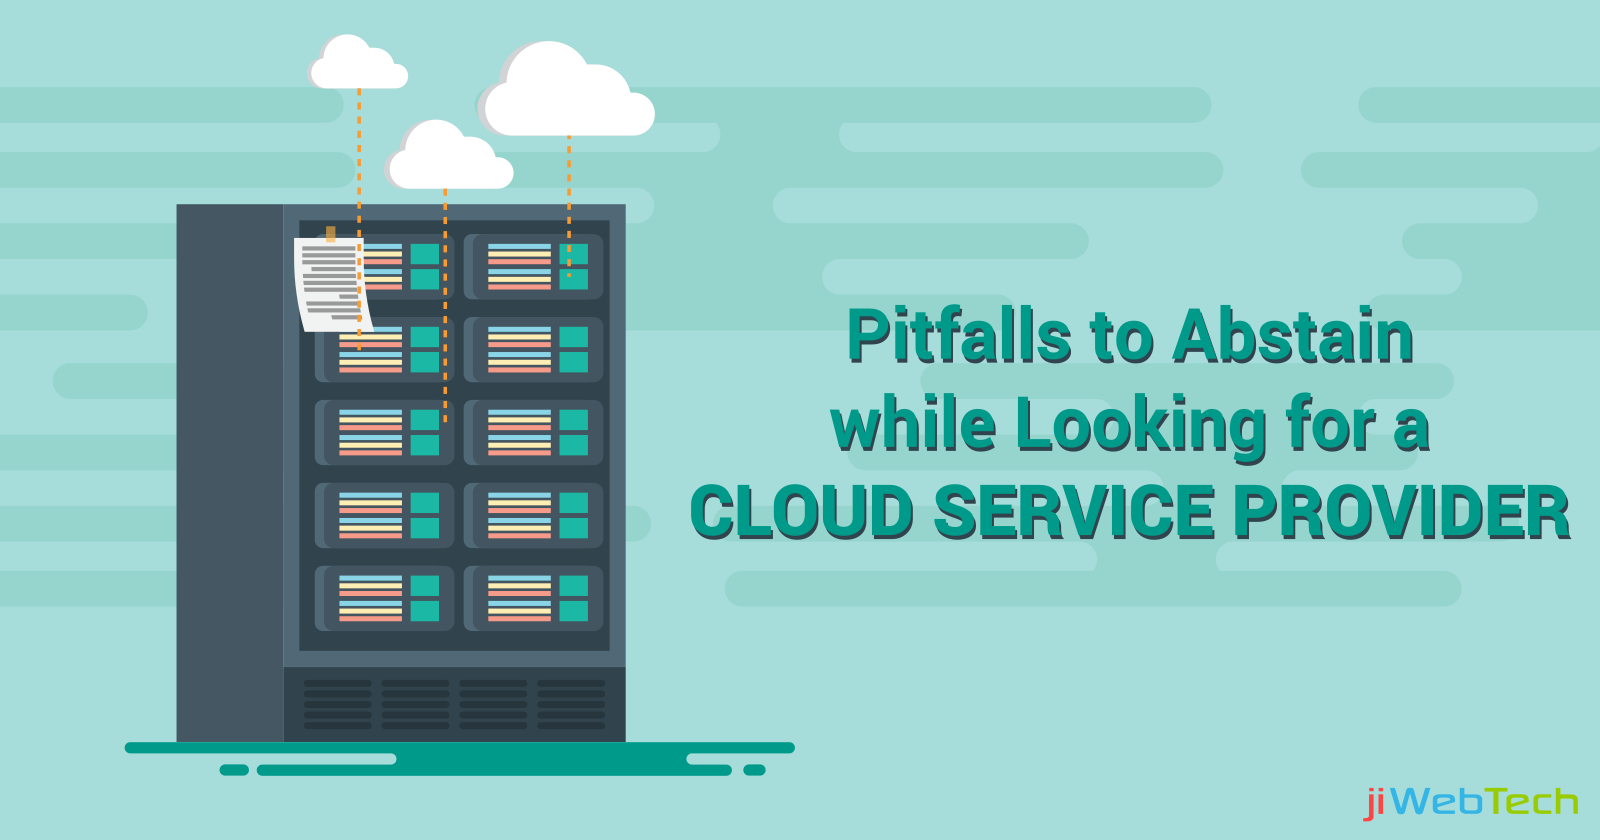 Pitfalls to Abstain while Looking for a Cloud Service Provider